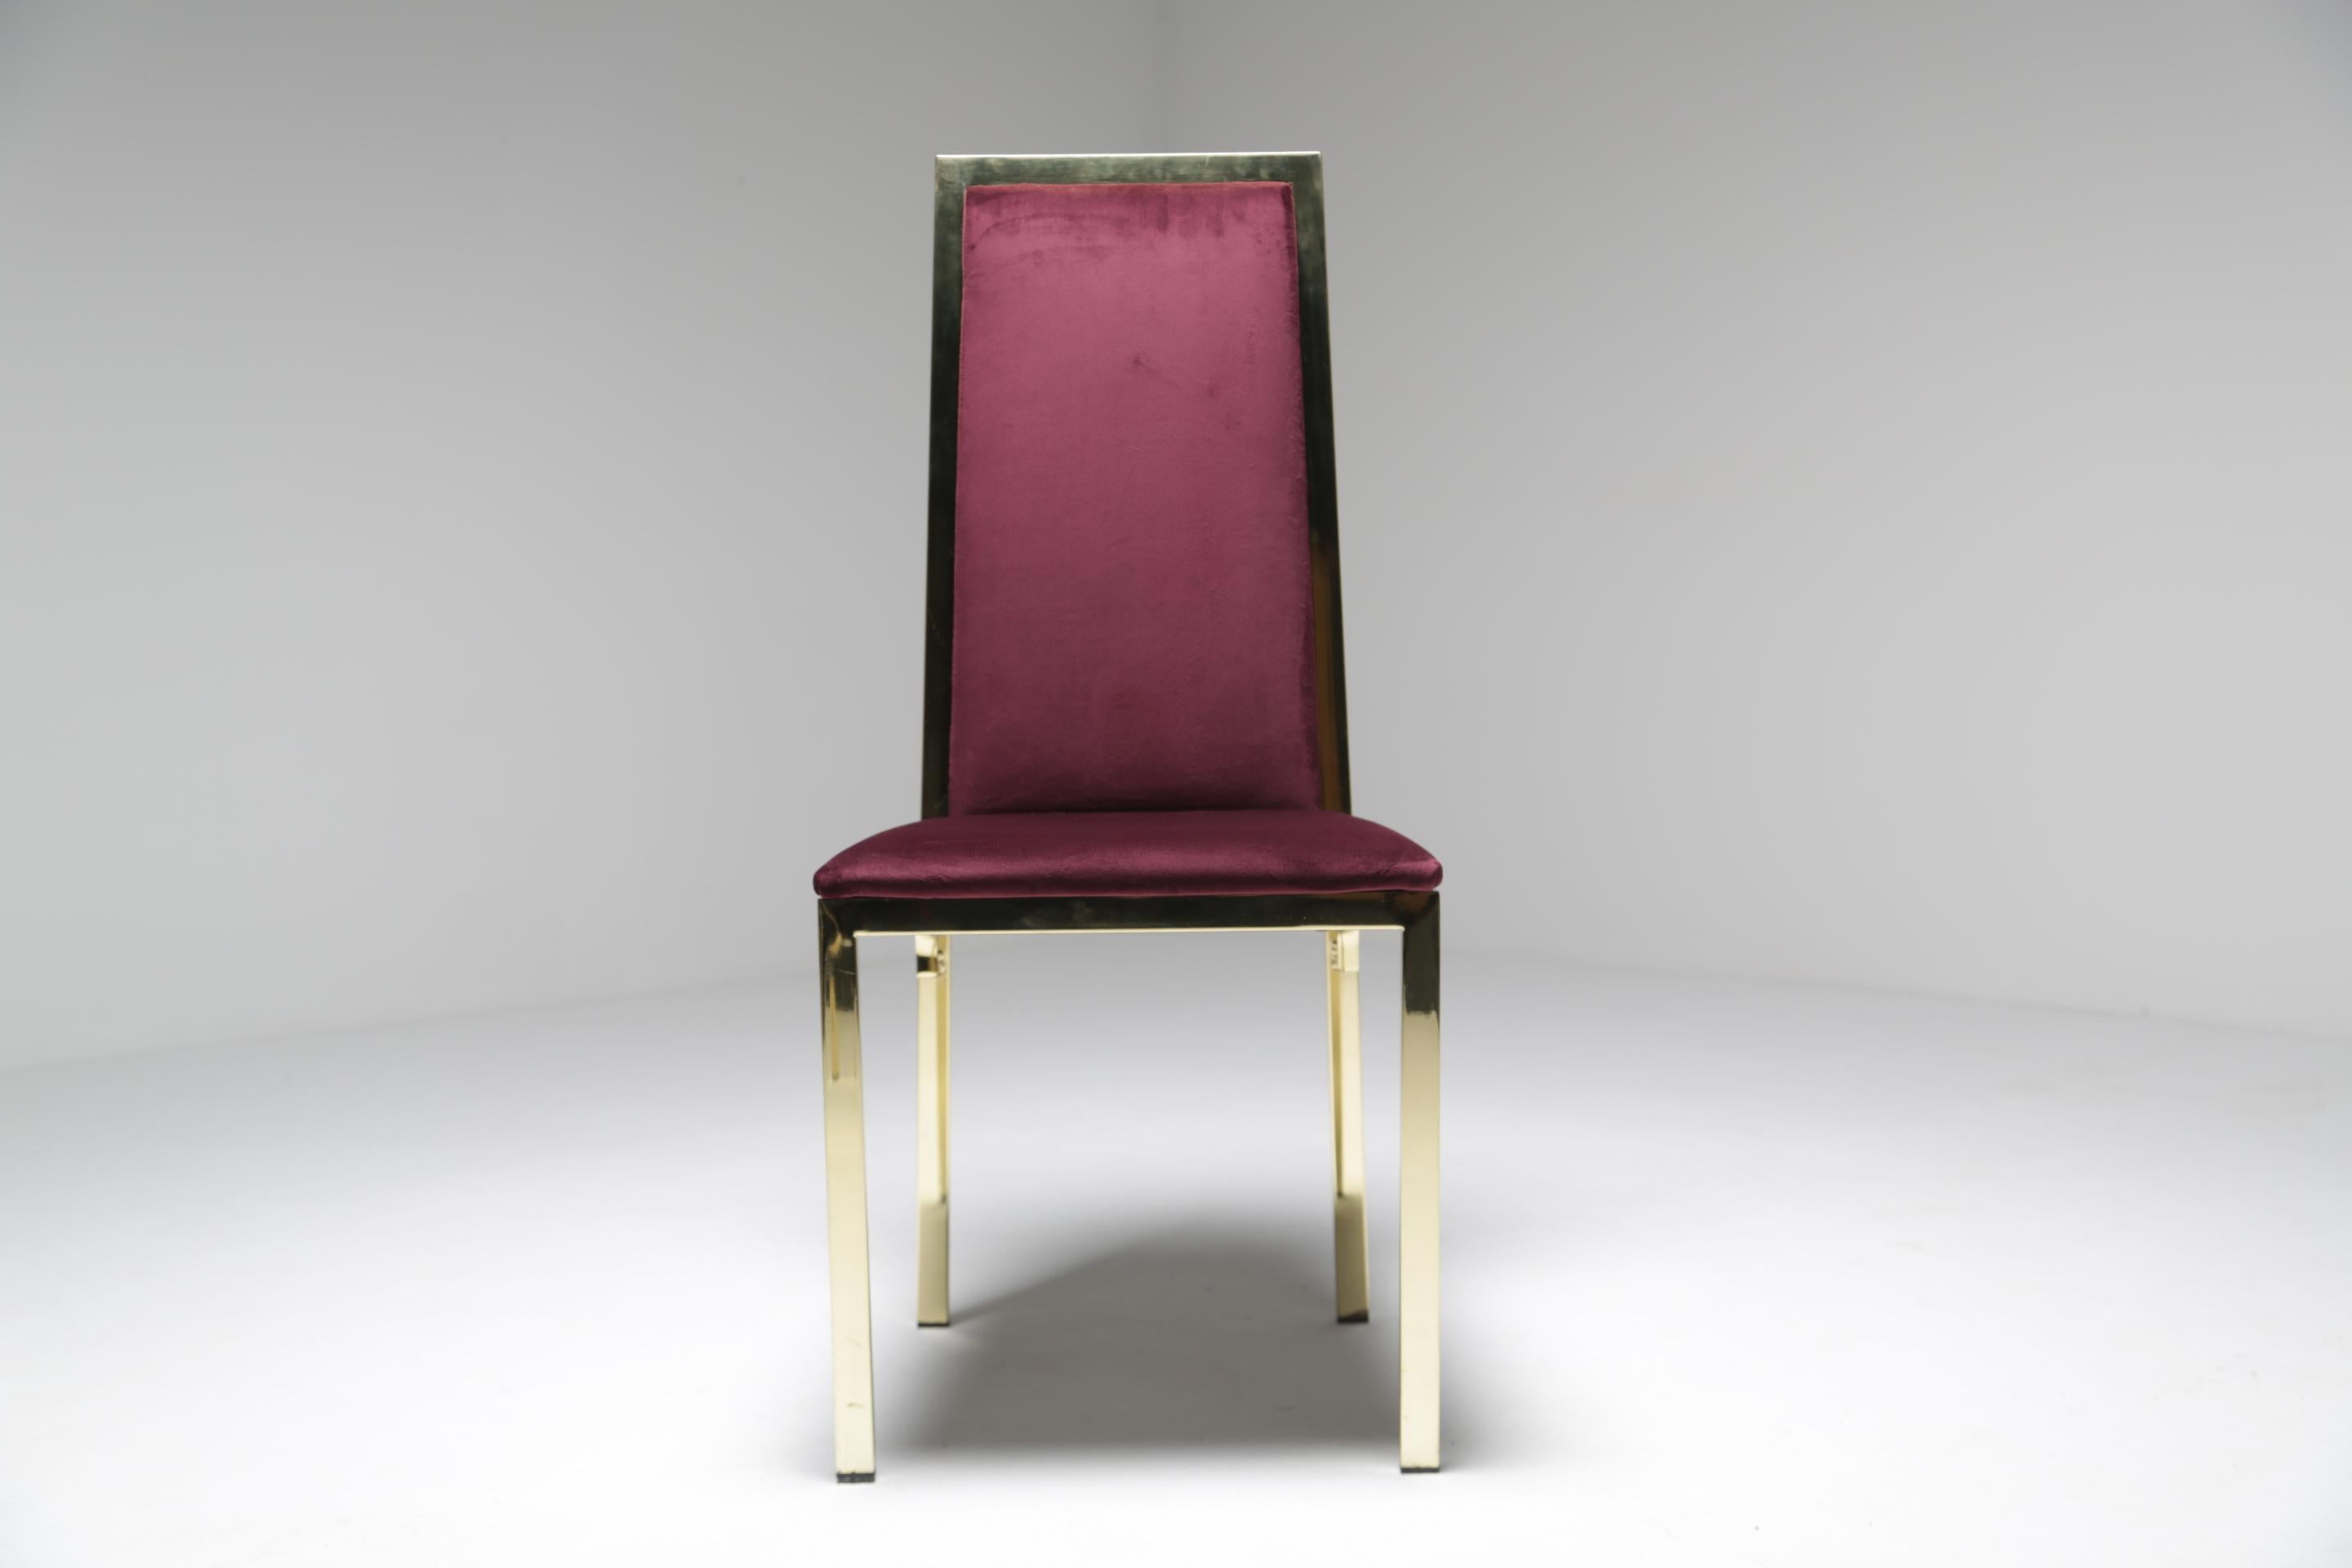 8 Romeo Rega Italian Brass Dining Chairs in Purple Velvet In Good Condition For Sale In Oberstown, Lusk, IE